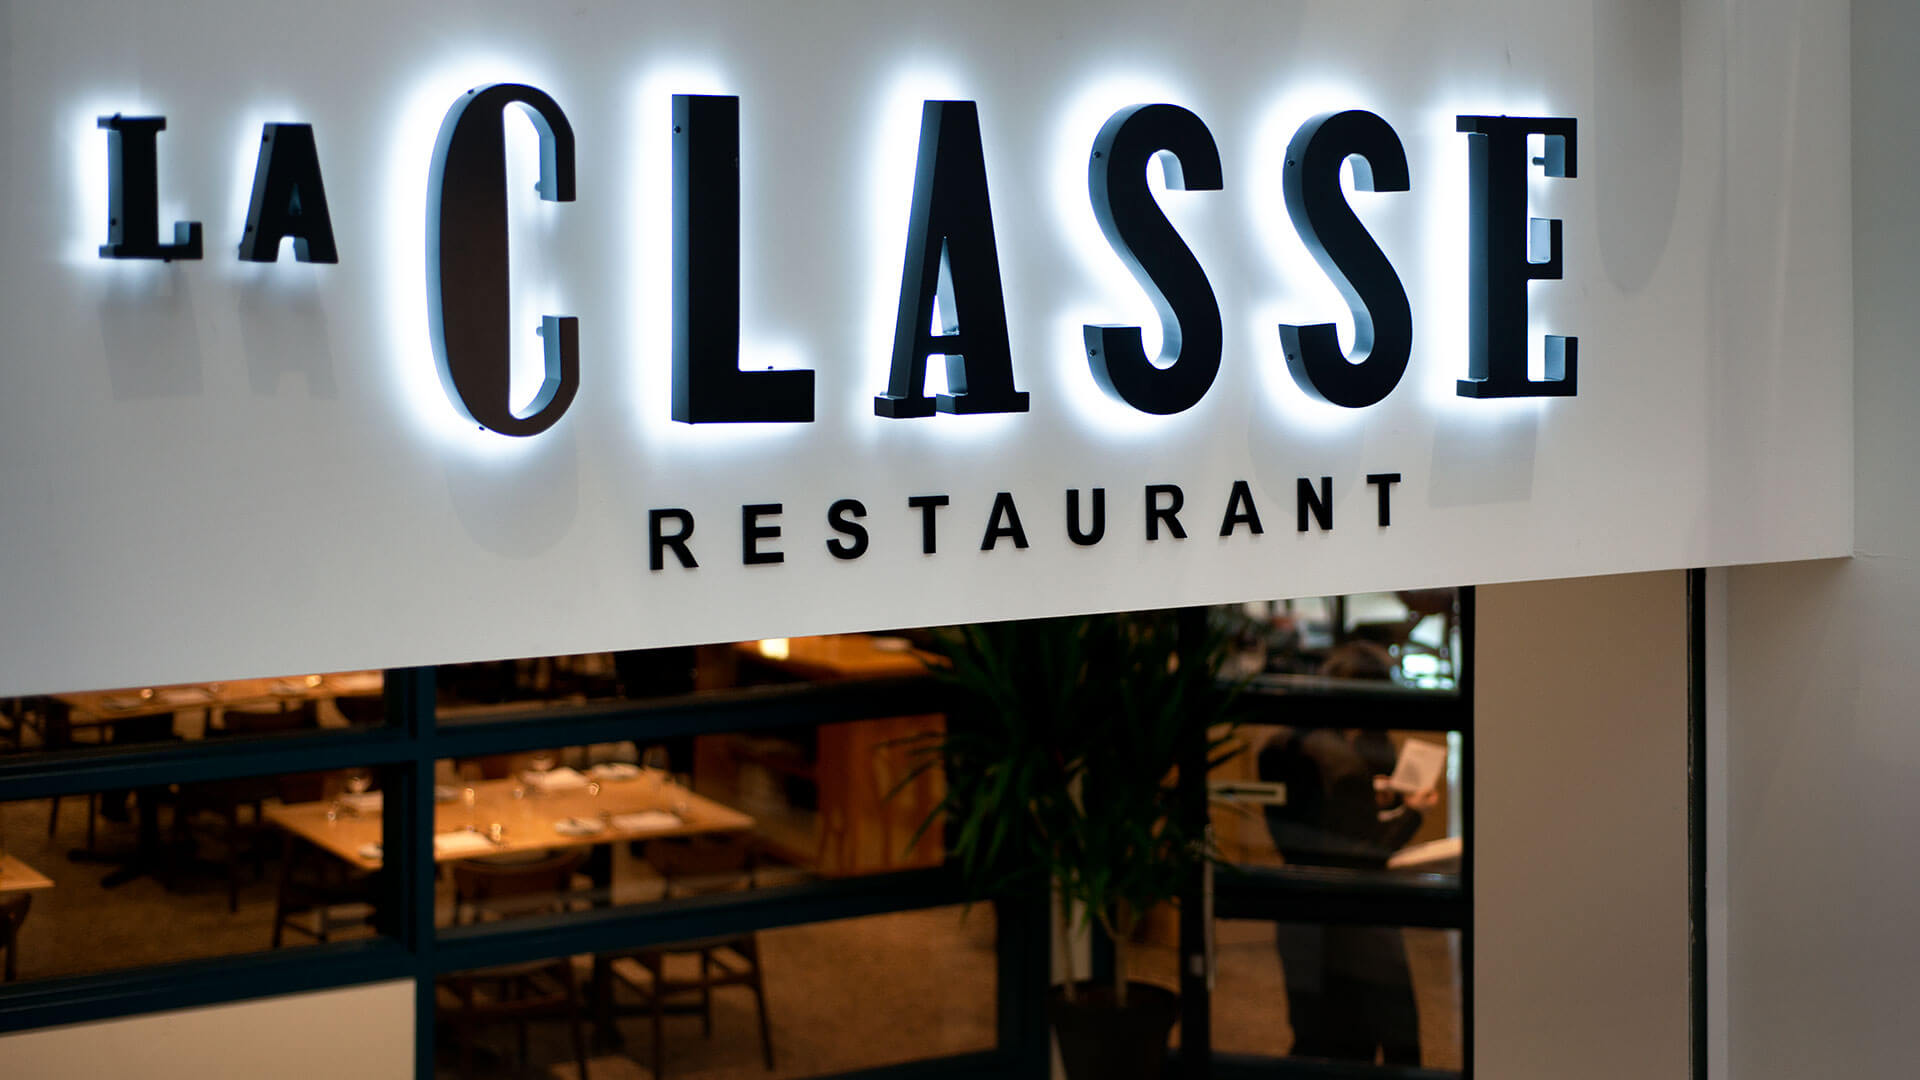 Illuminated signage for "La Classe Restaurant" with a cozy dining area visible in the background.